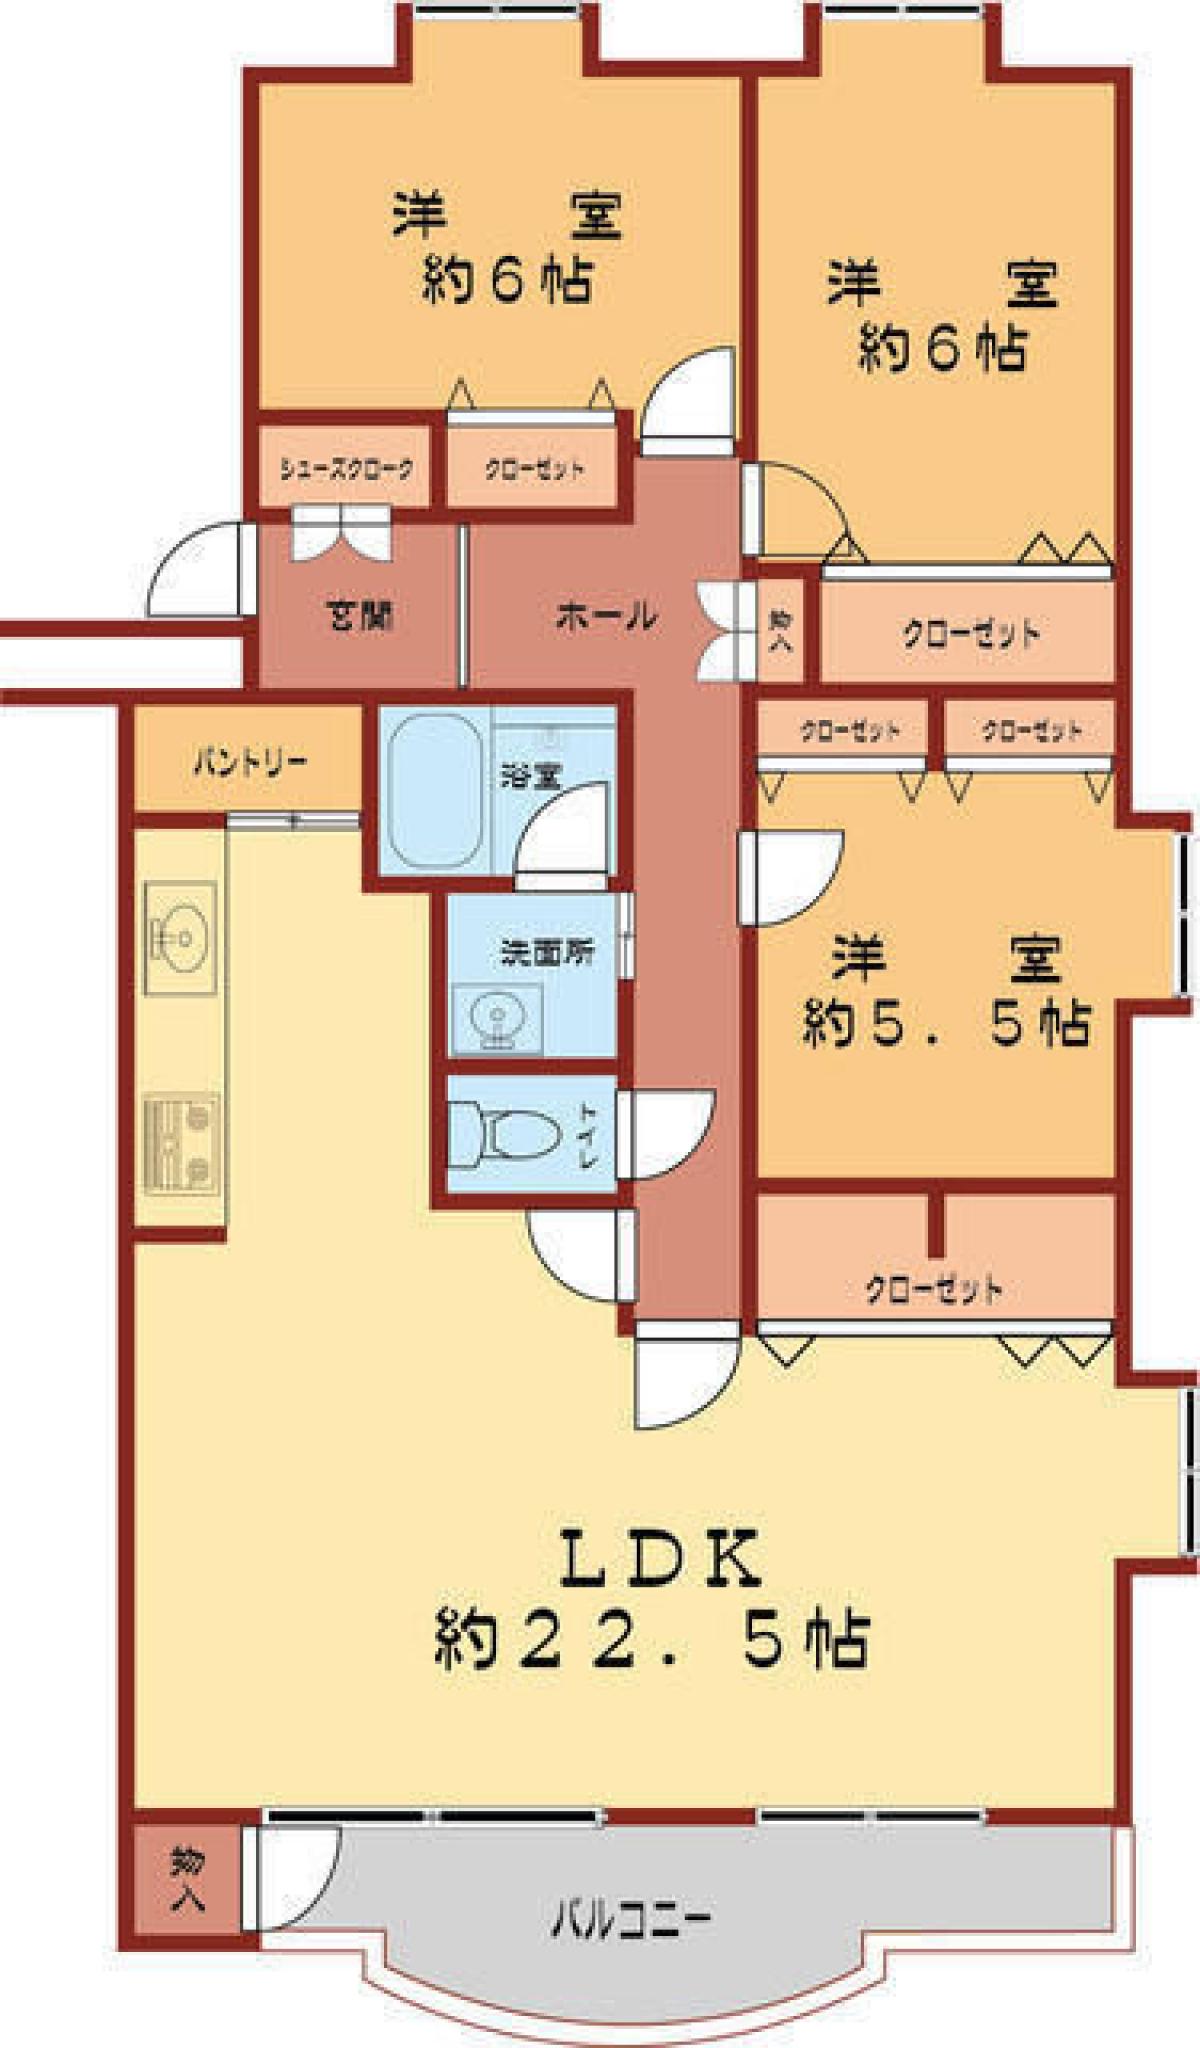 Picture of Apartment For Sale in Hadano Shi, Kanagawa, Japan